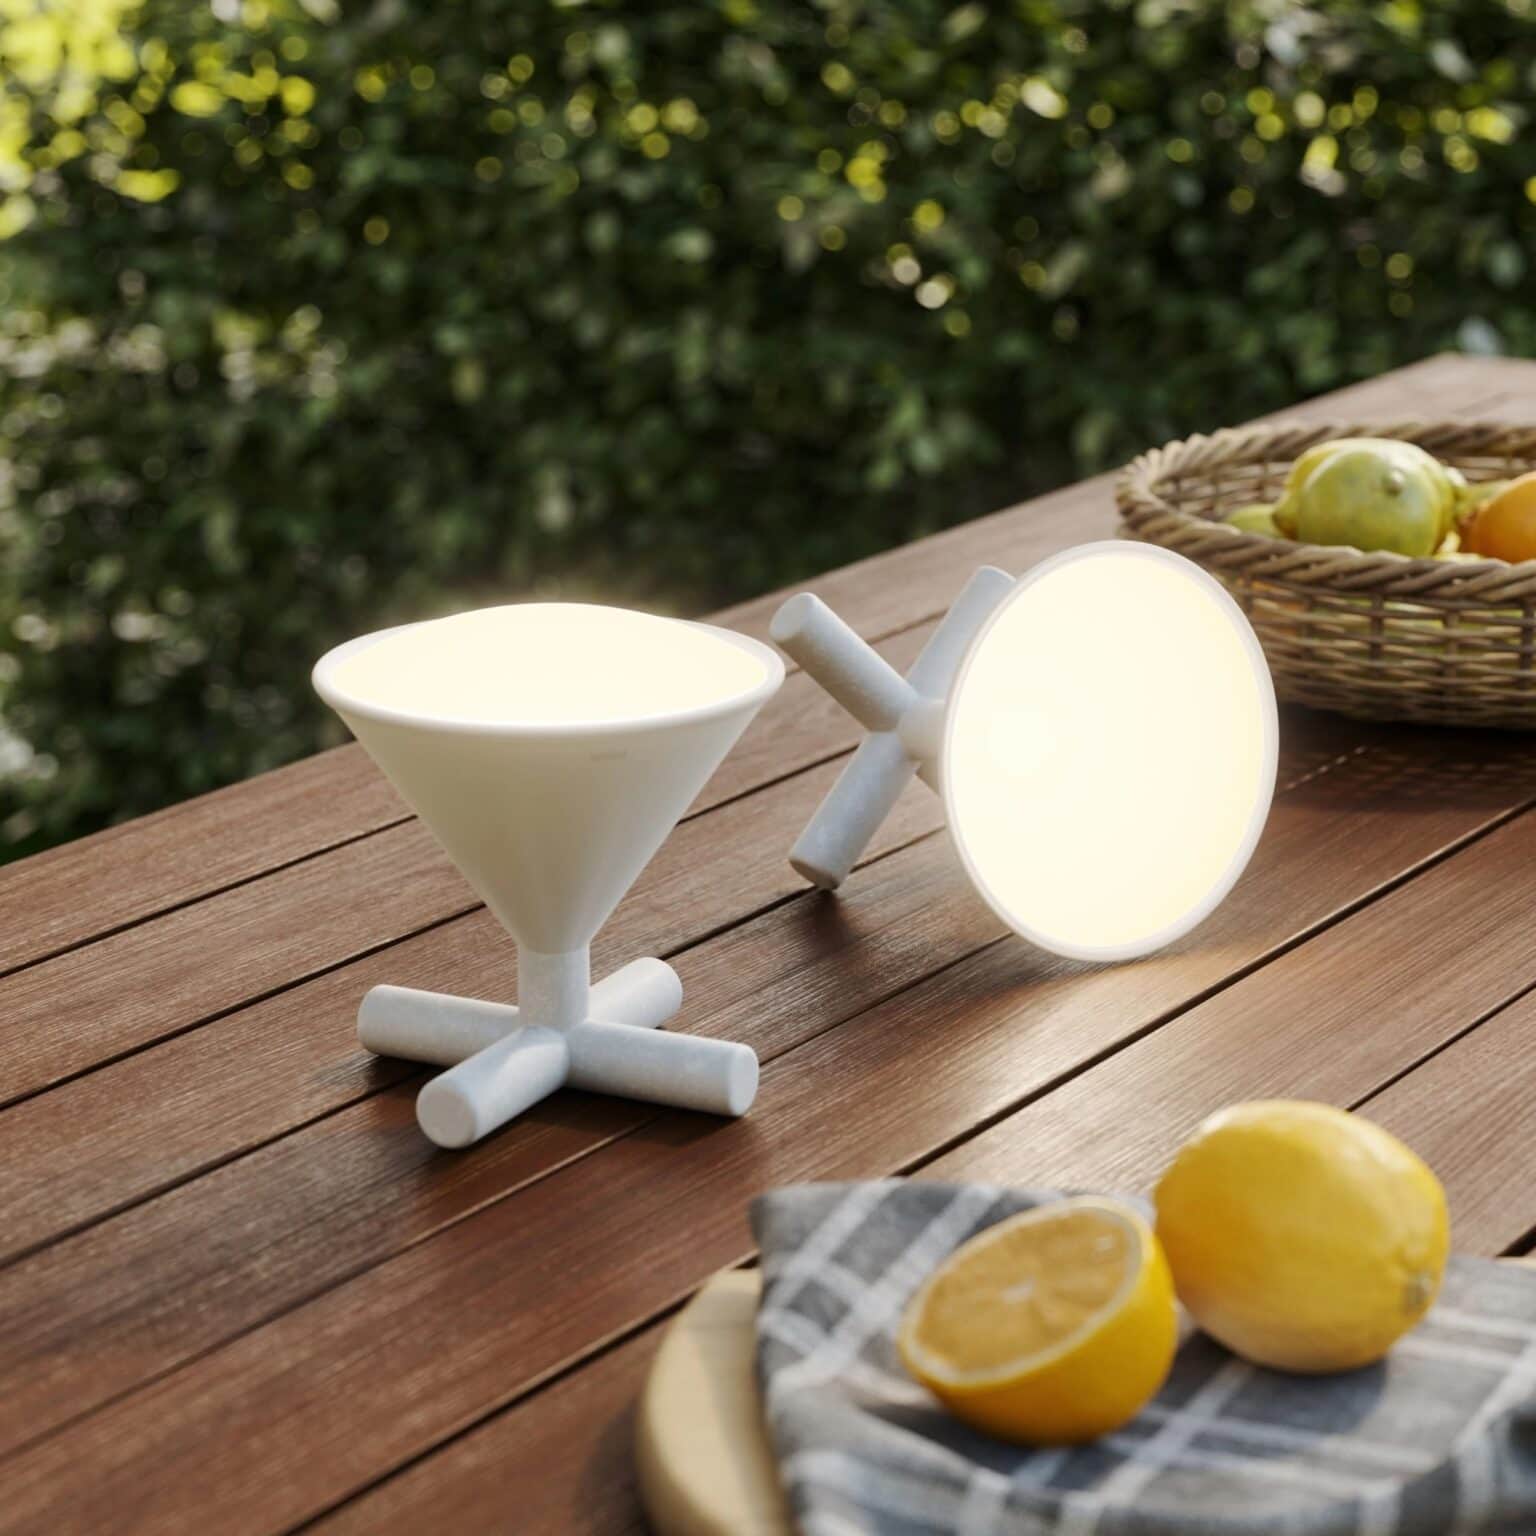 The Cono portable smart lamp can stand up, lie down or be hung up. That's handy.